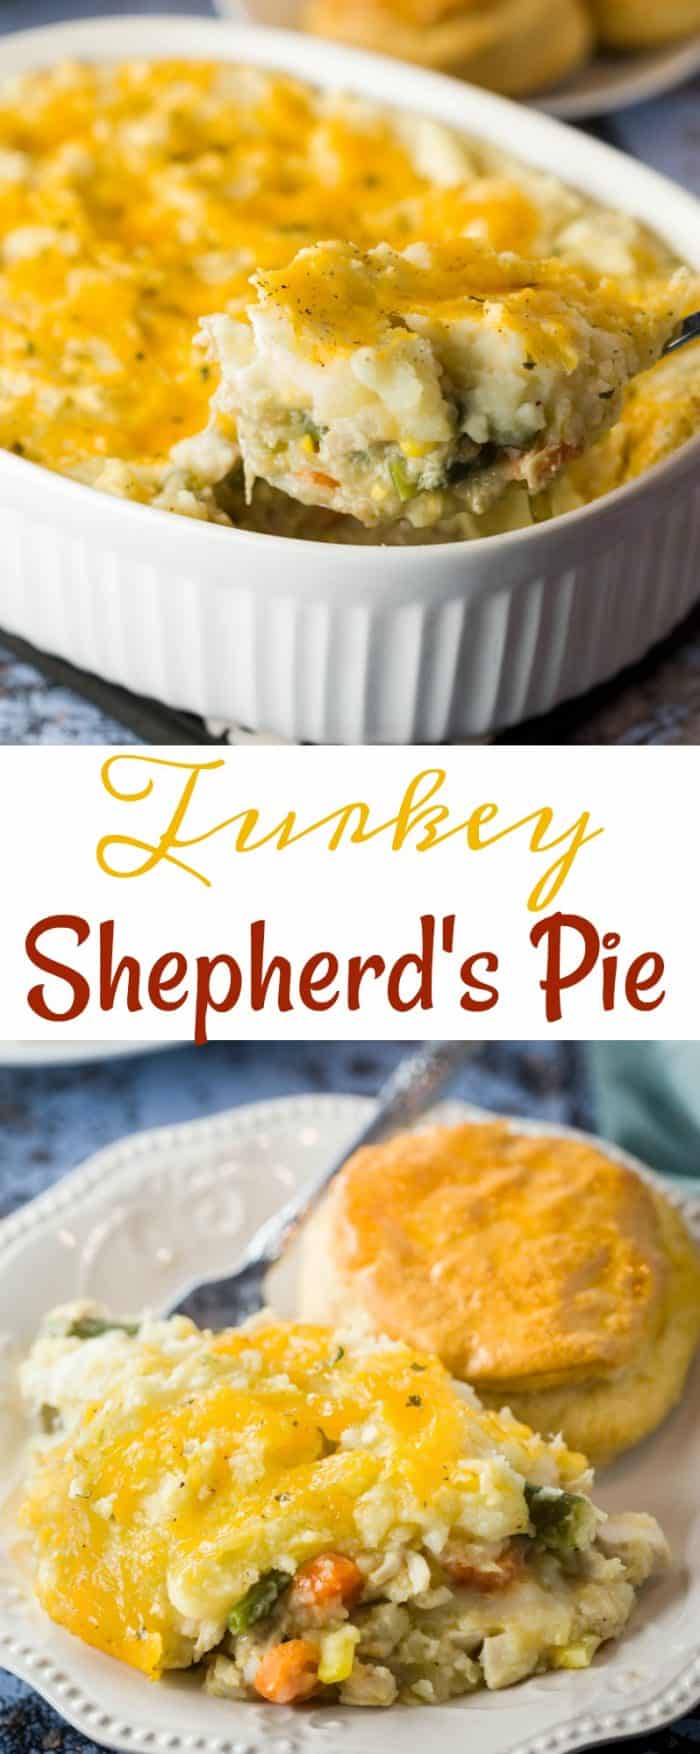 Juicy turkey tossed with a medley of vegetables and gravy. All topped with cheesy mashed potatoes and baked to golden perfection. #turkey #casserole #shephardspie #potatoes #thanksgivingleftovers #recipe #easyrecipes #dinner #comfortfood